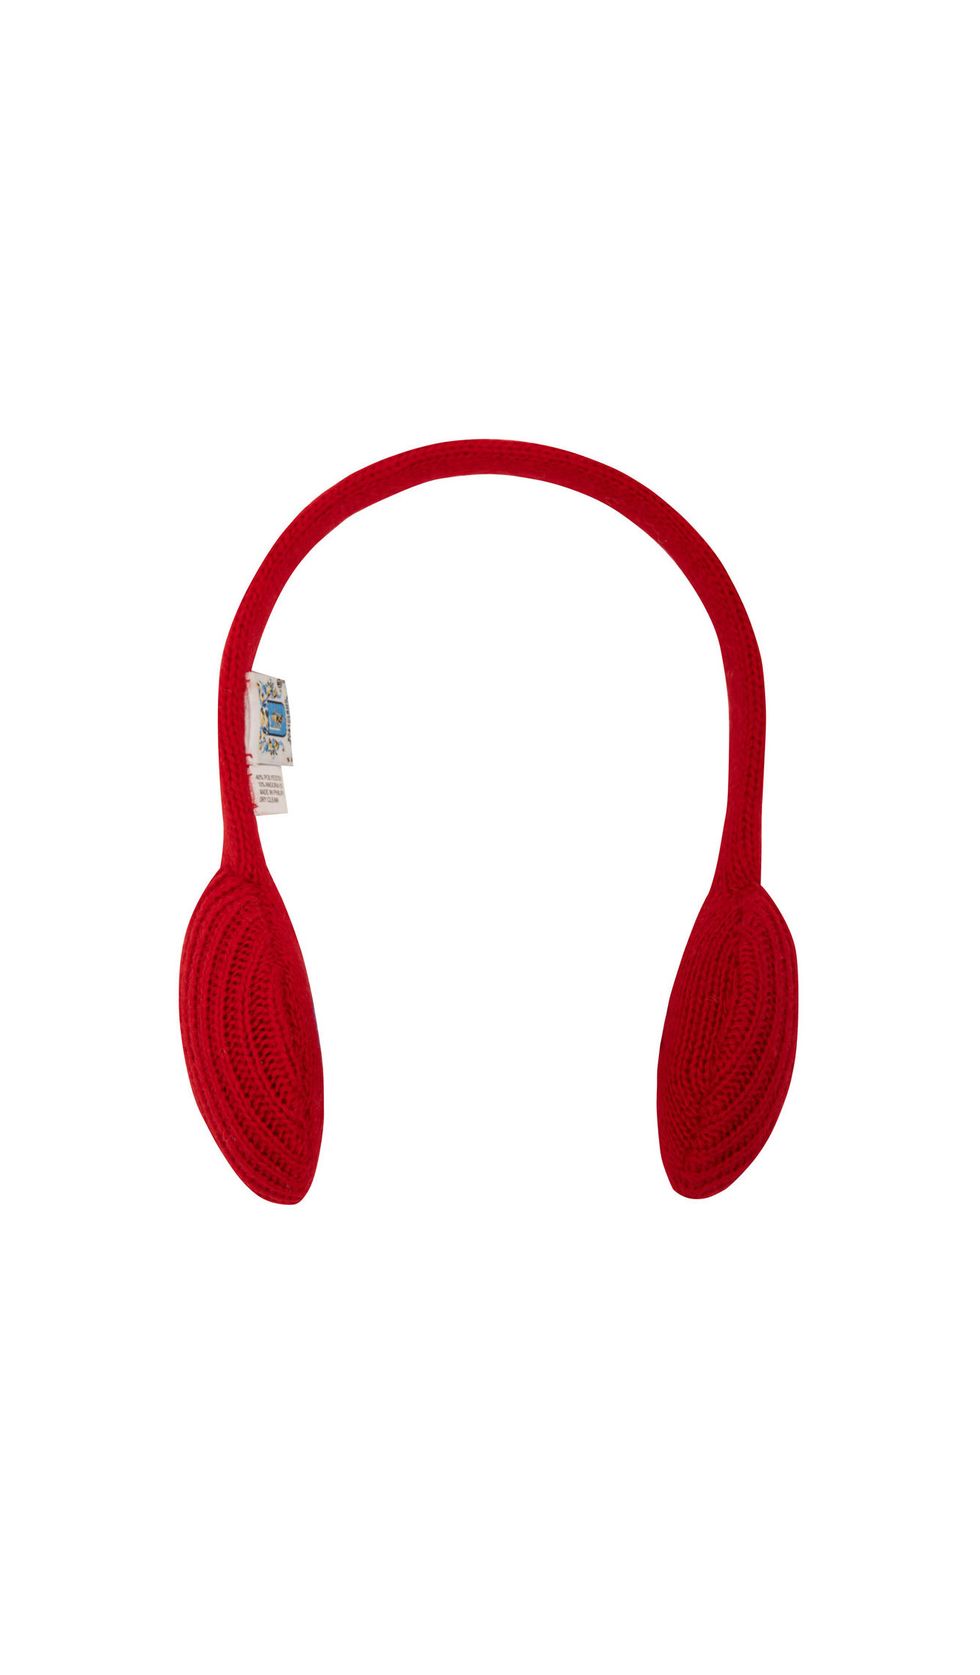 Audio equipment, Electronic device, Red, Technology, Gadget, Carmine, Audio accessory, Pattern, Peripheral, Coquelicot, 